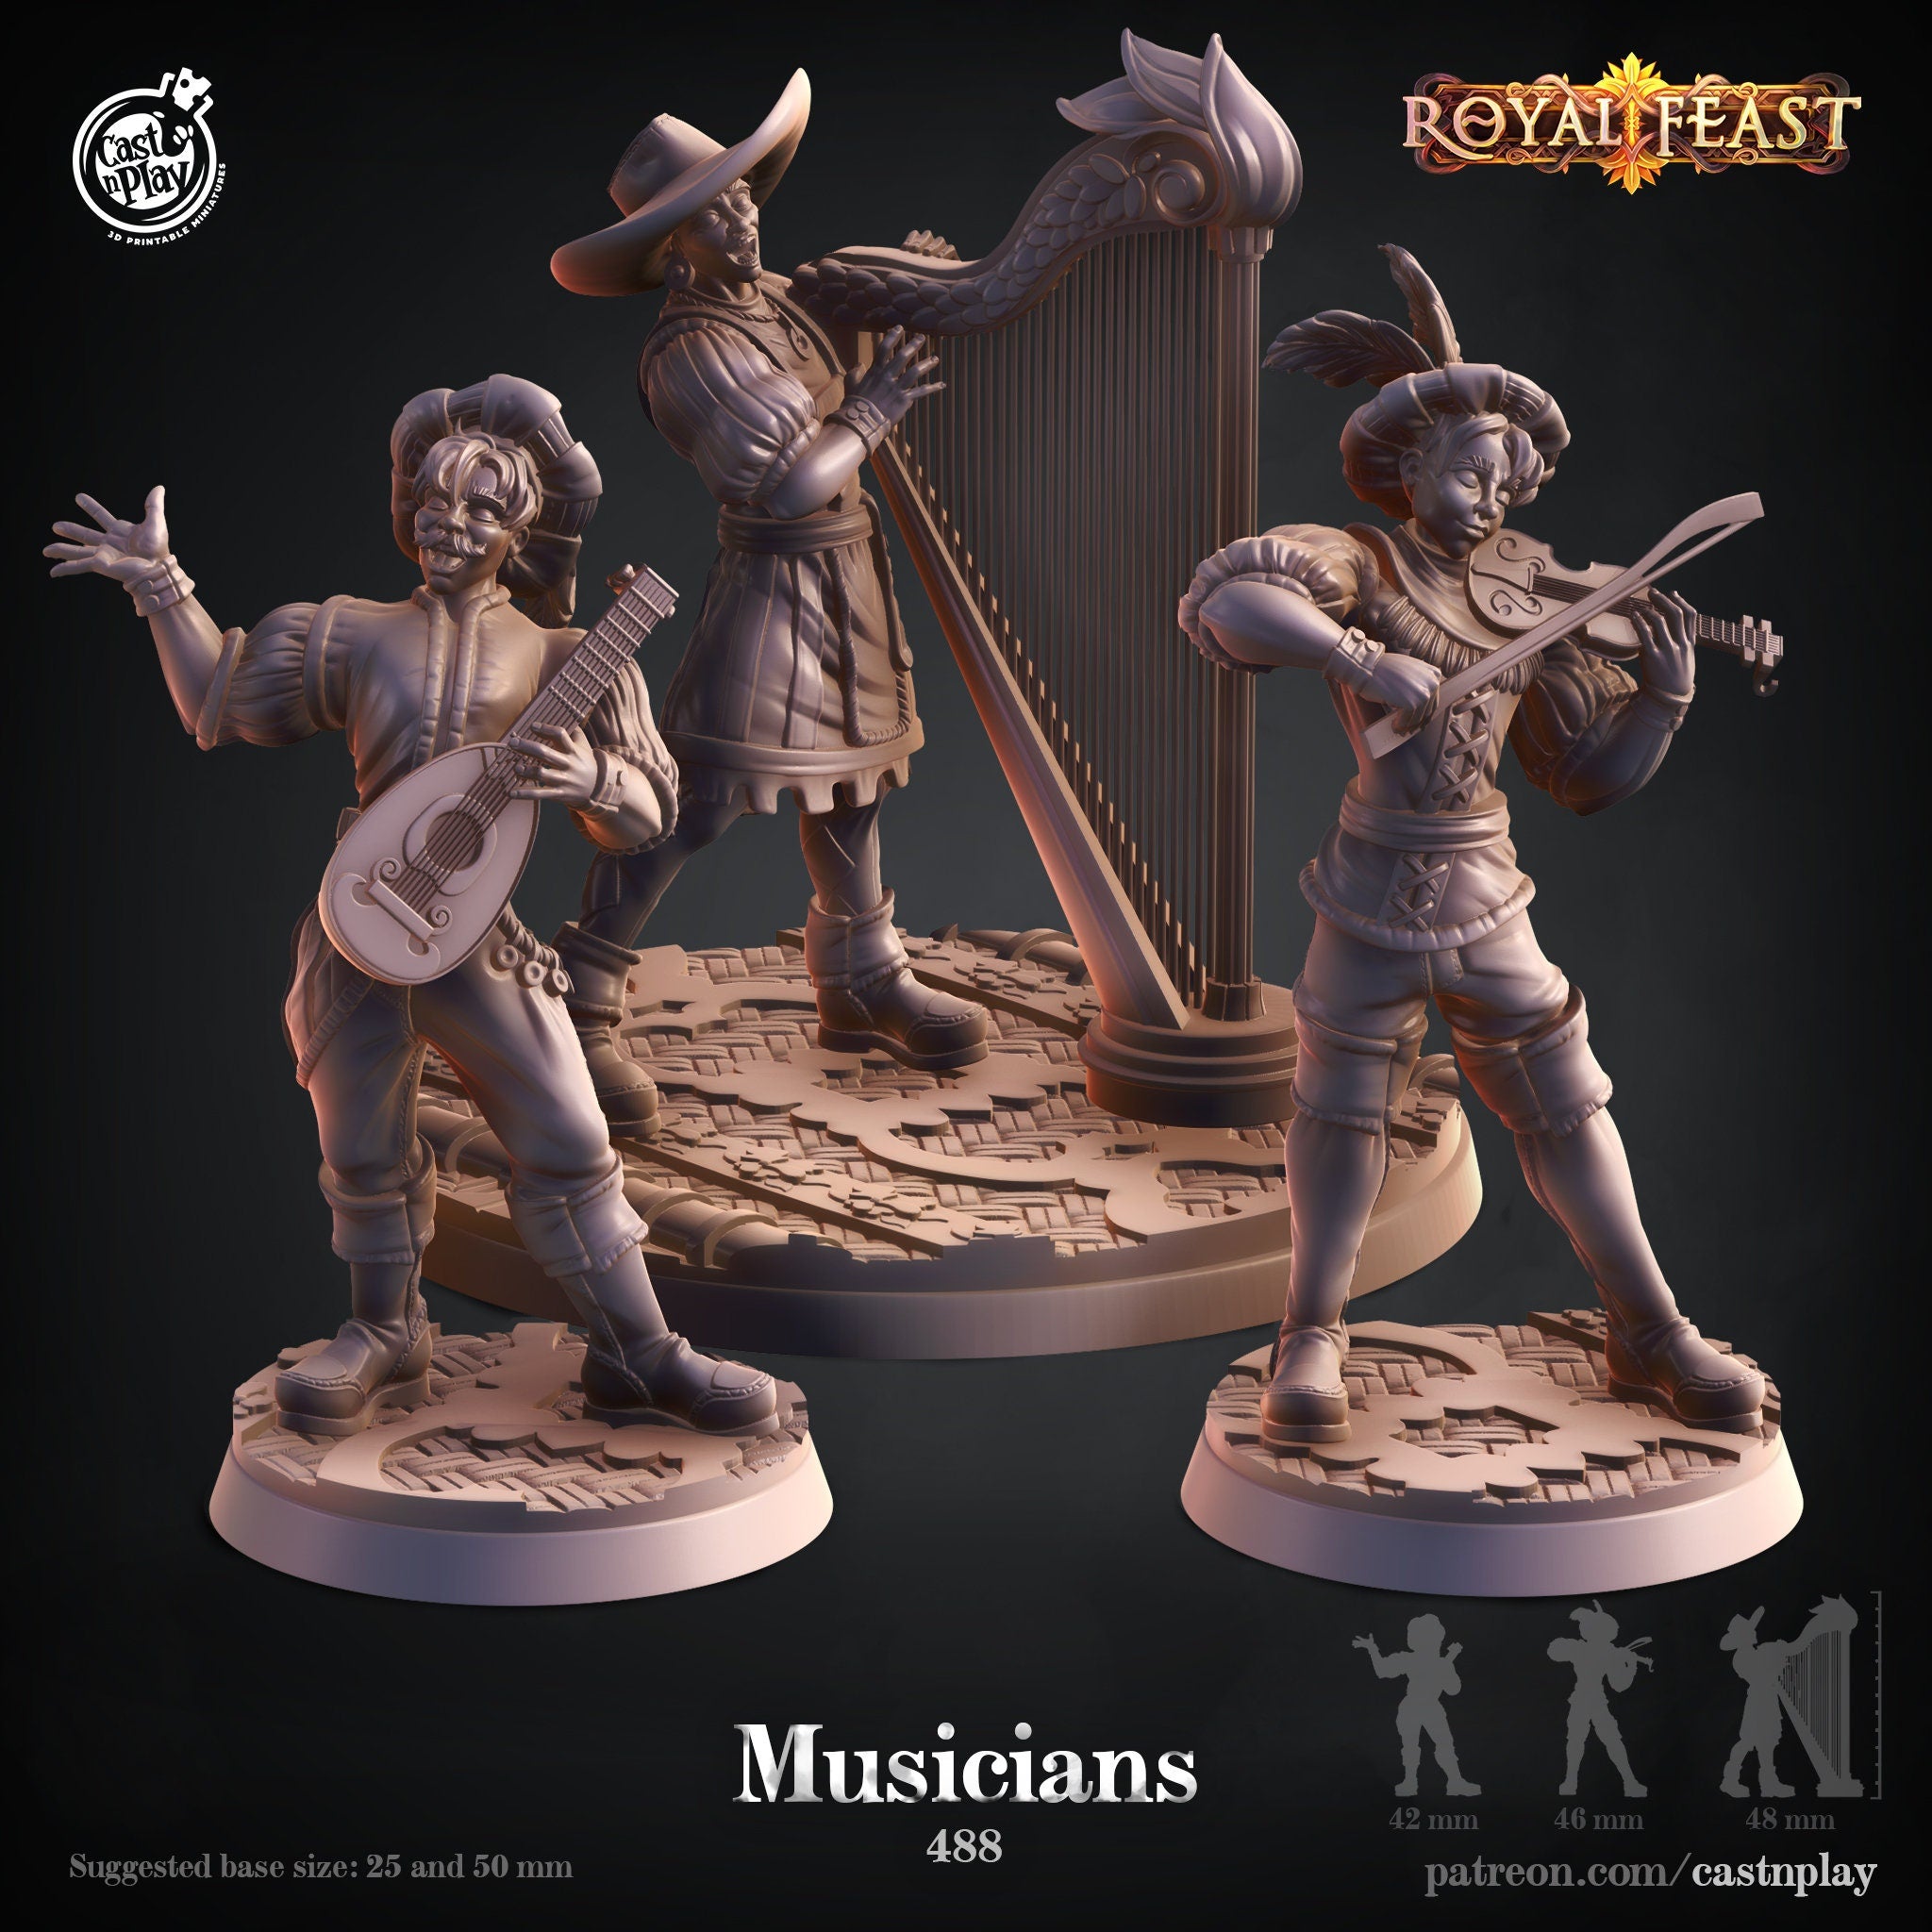 Musicians by Cast N Play (Royal Feast)